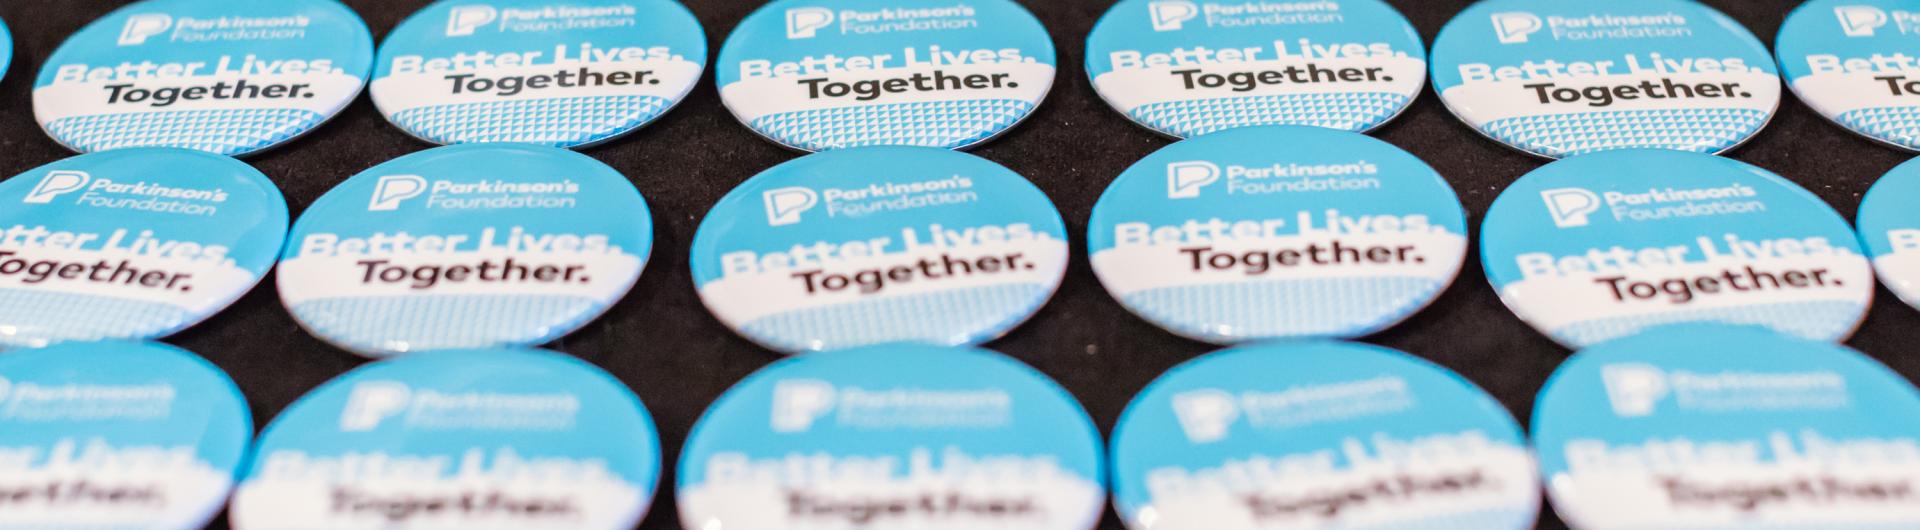 Buttons reading Parkinson's Foundation: Better Lives Together